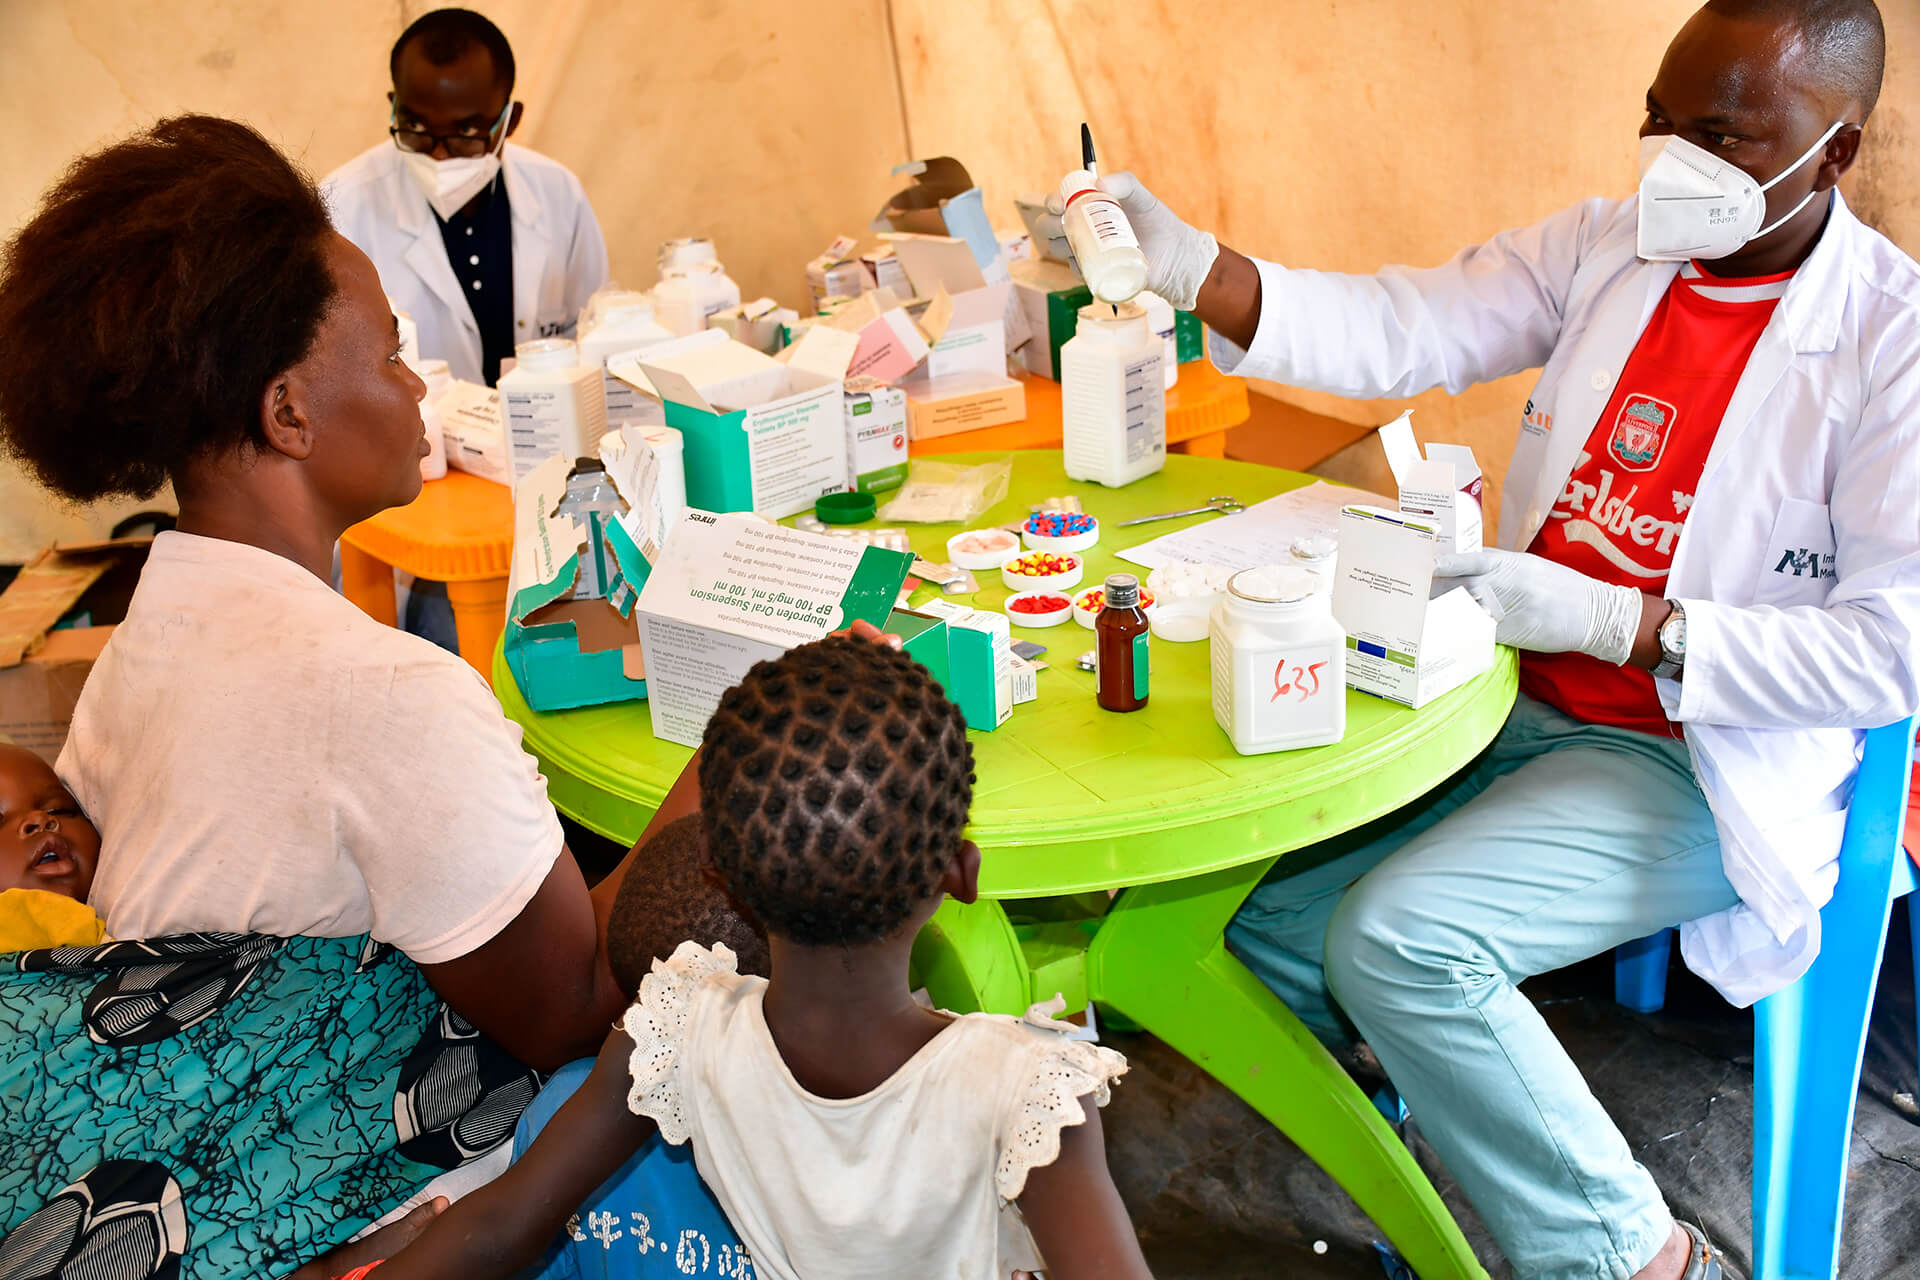 Maua Kashindi, an IDP in Baraka, receives medication after her consultation at the mobile clinic.